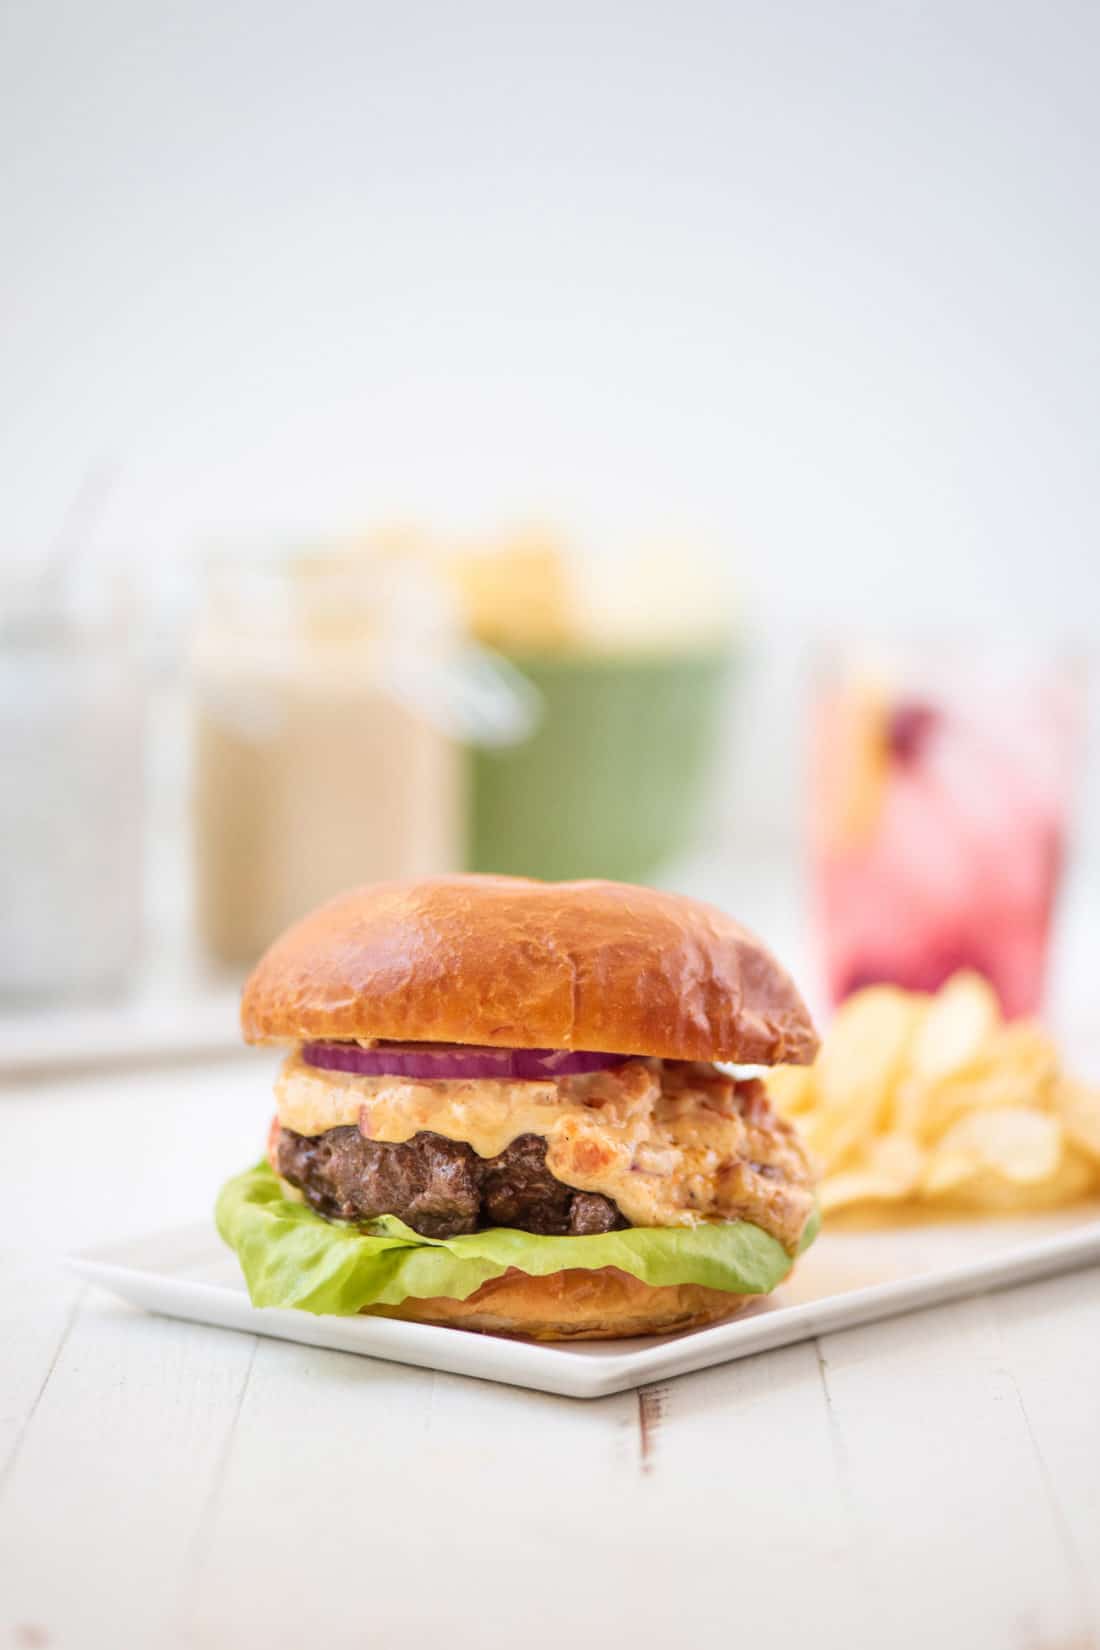 Burger with Pimento Cheese Spread / Photo by Kerri Brewer / Katie Workman / themom100.com